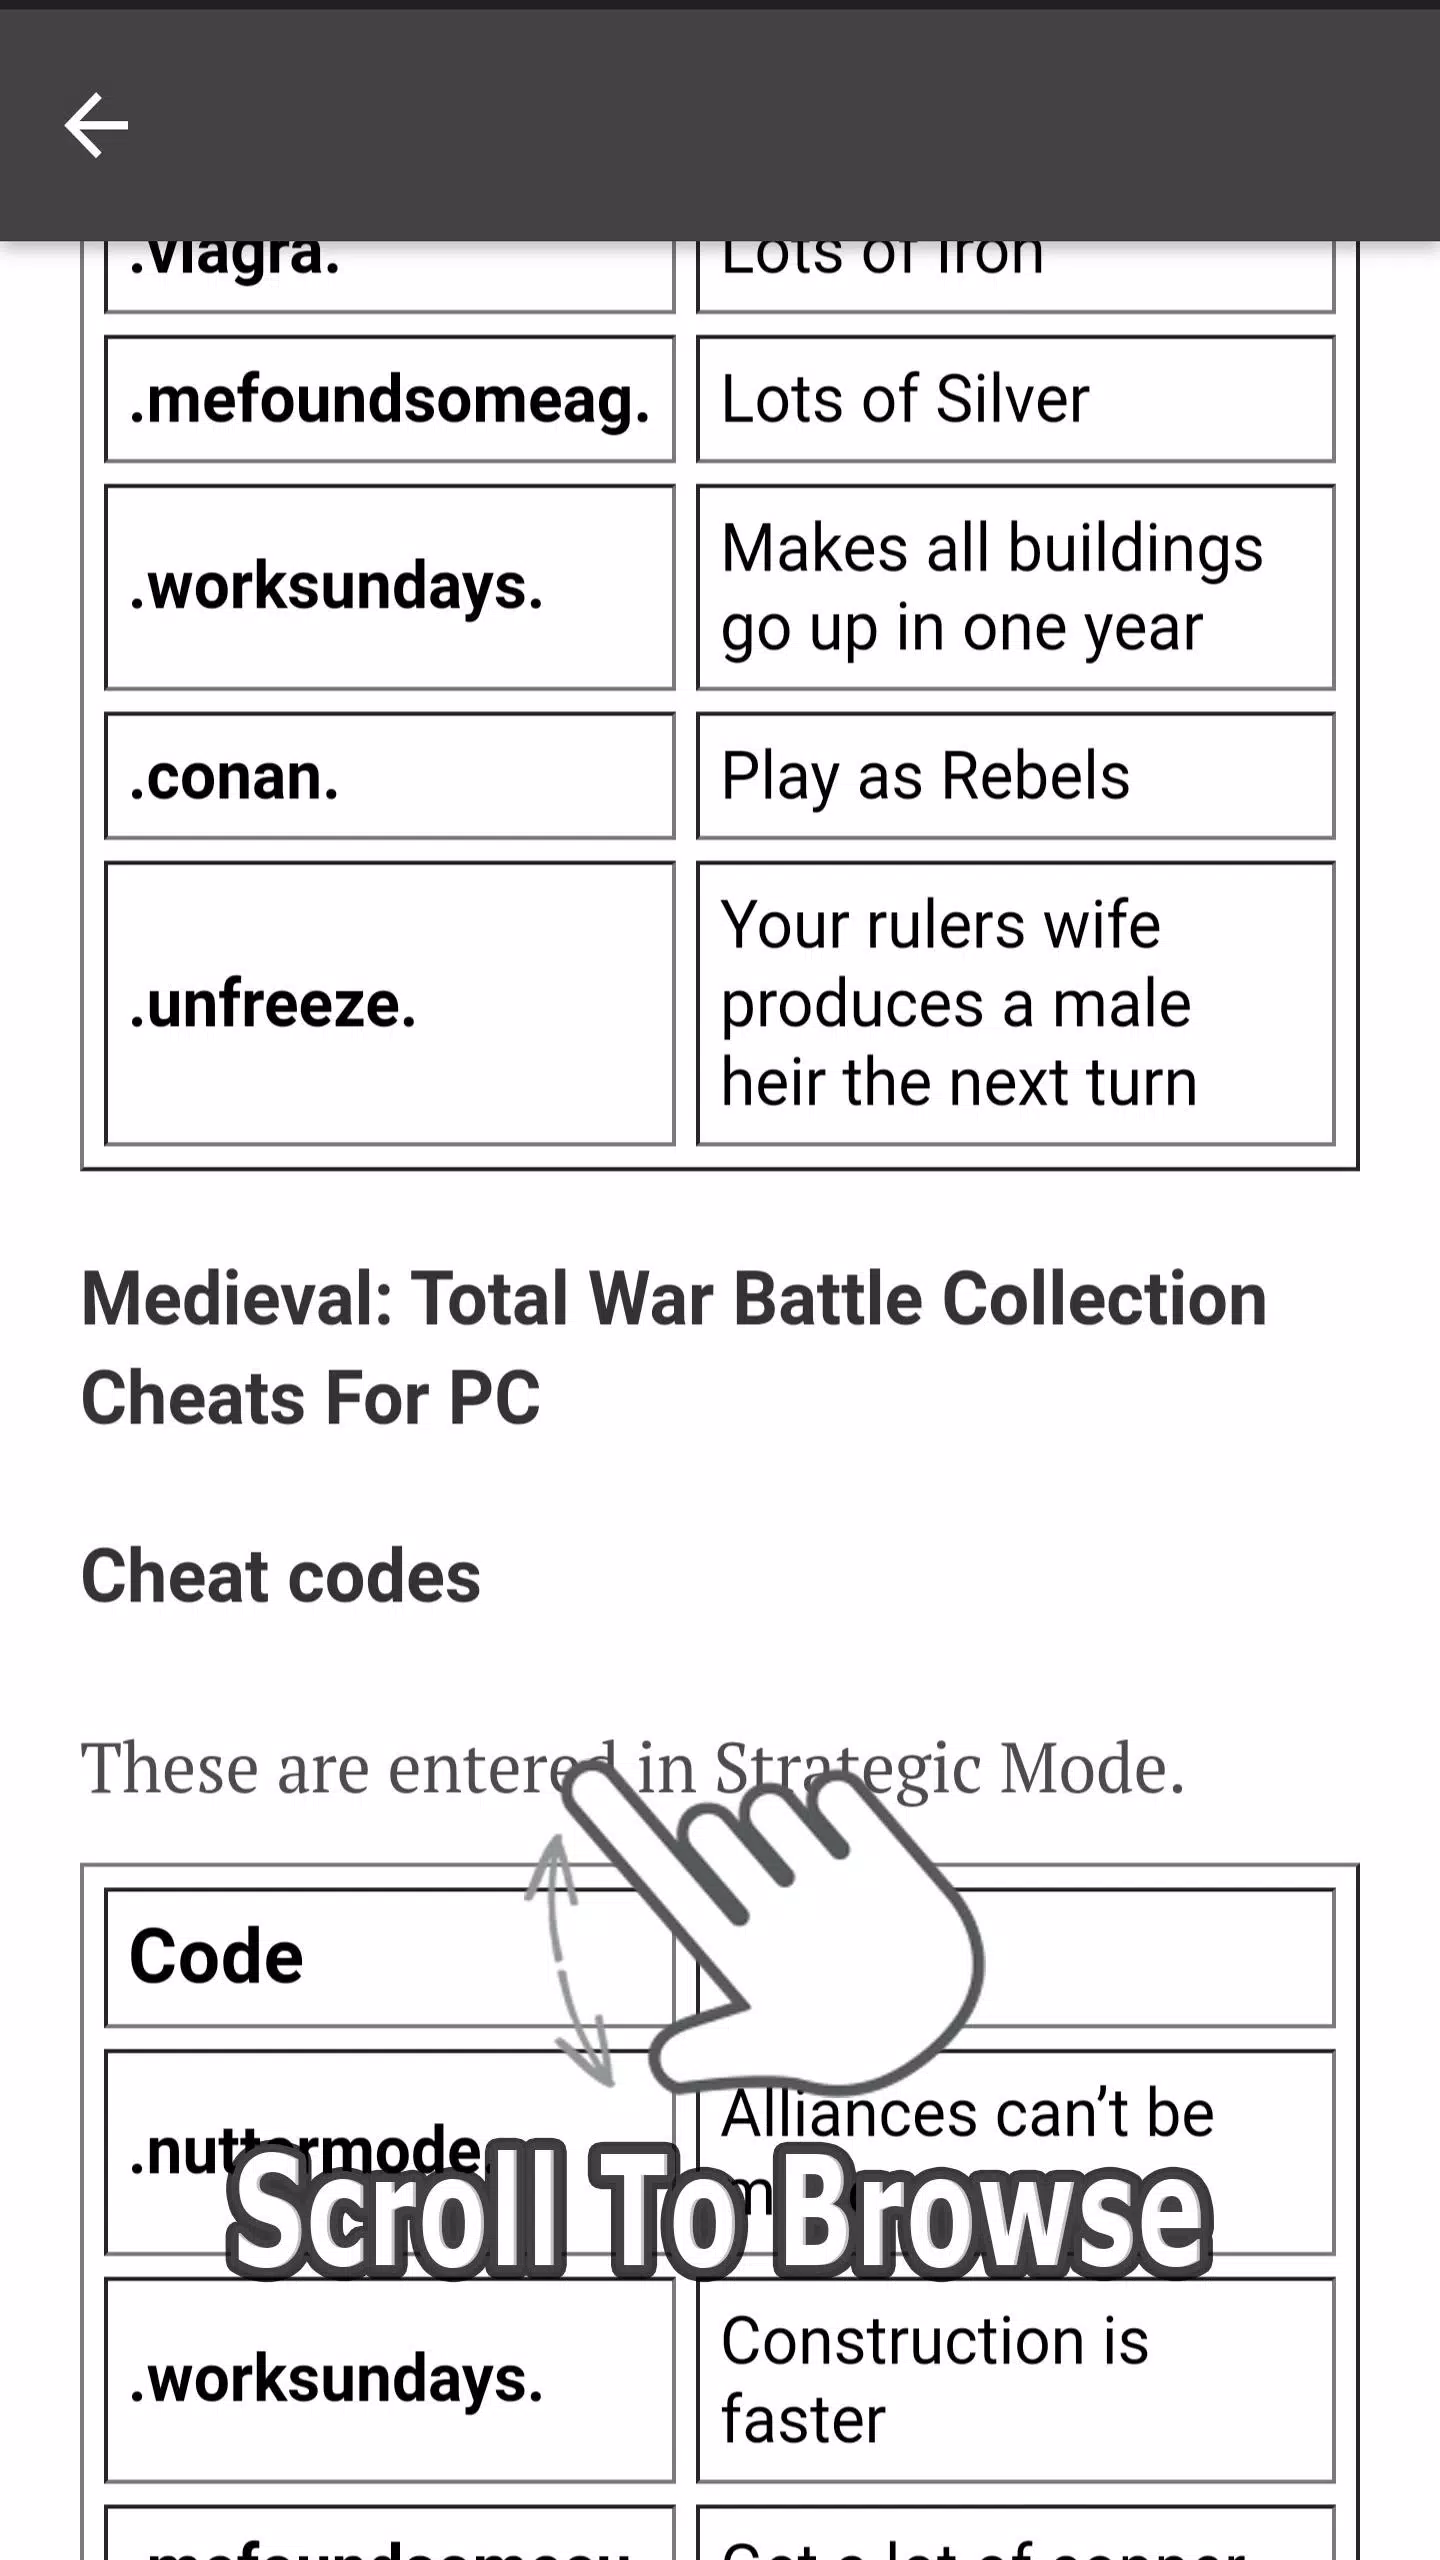 Cheat Codes Total Battle no Android e iOS - Cheats and Codes